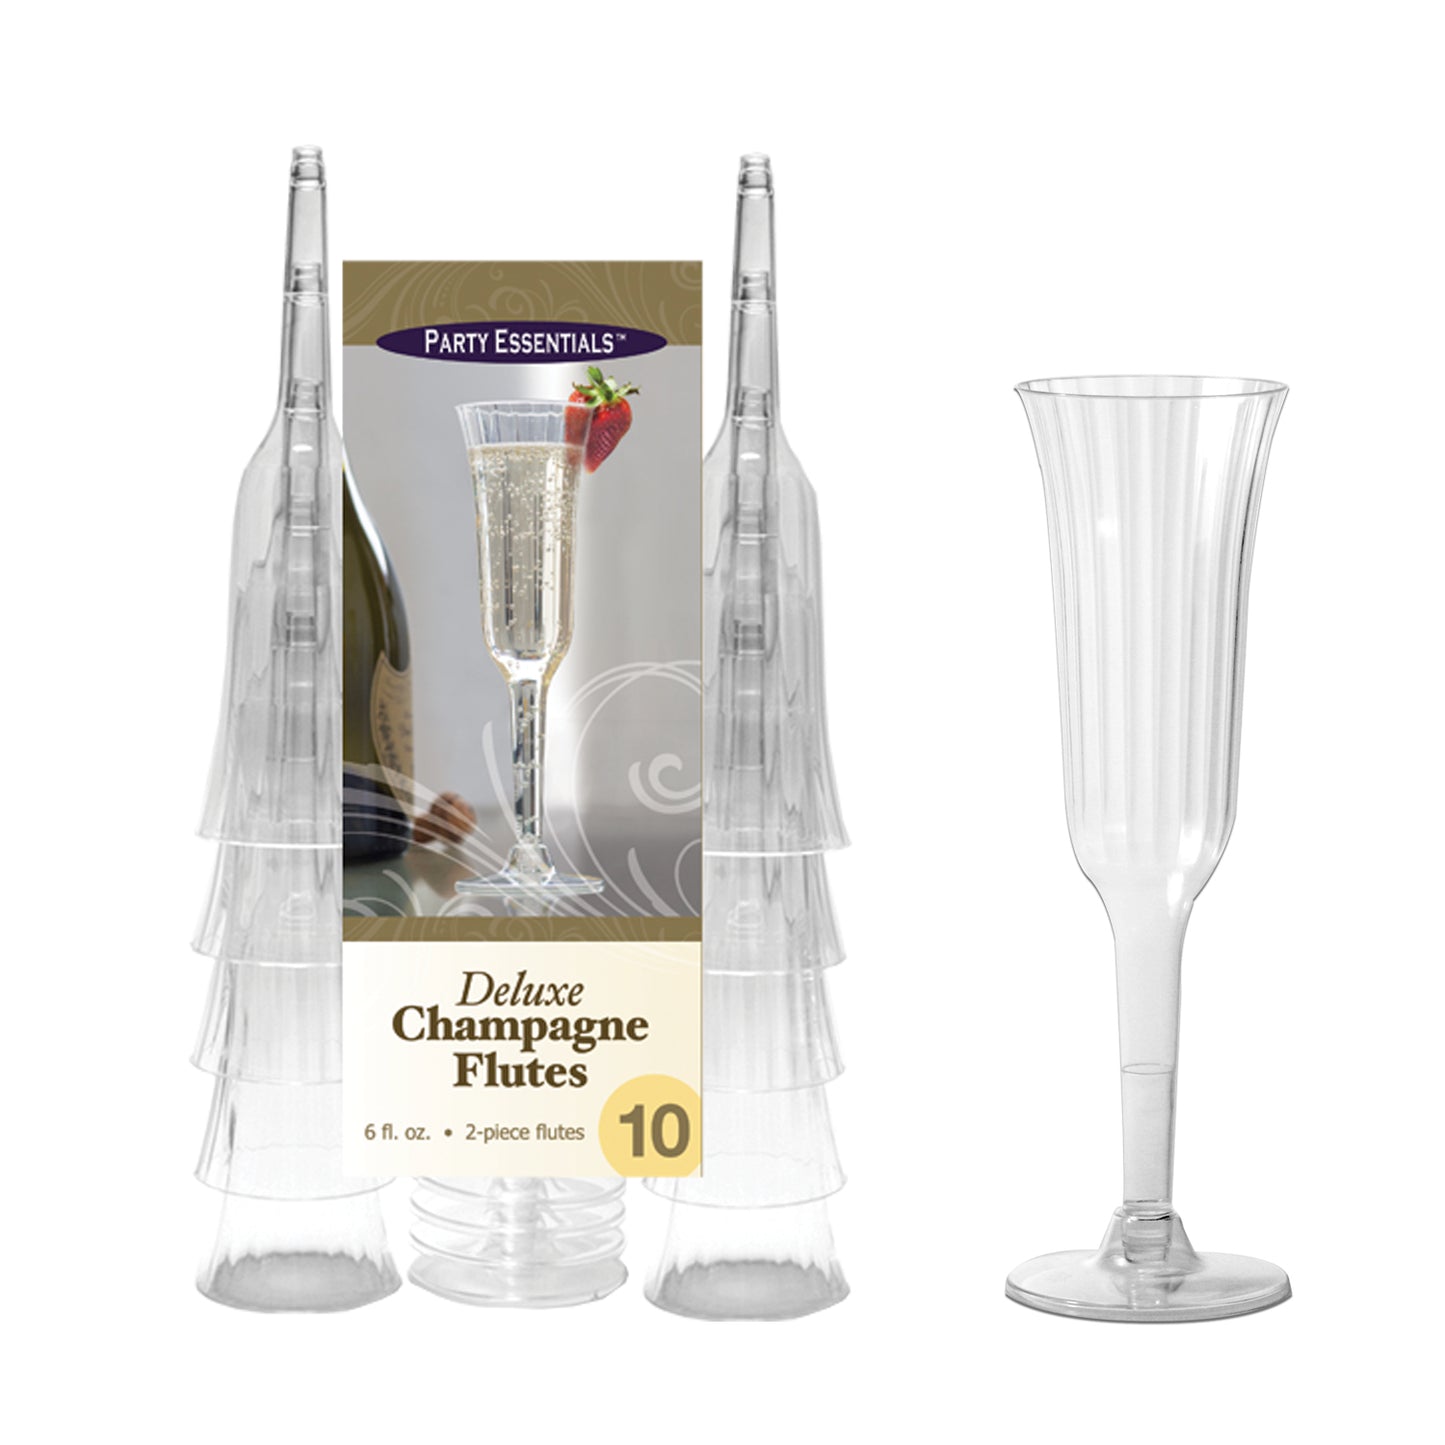 Deluxe Champagne Flutes 10ct